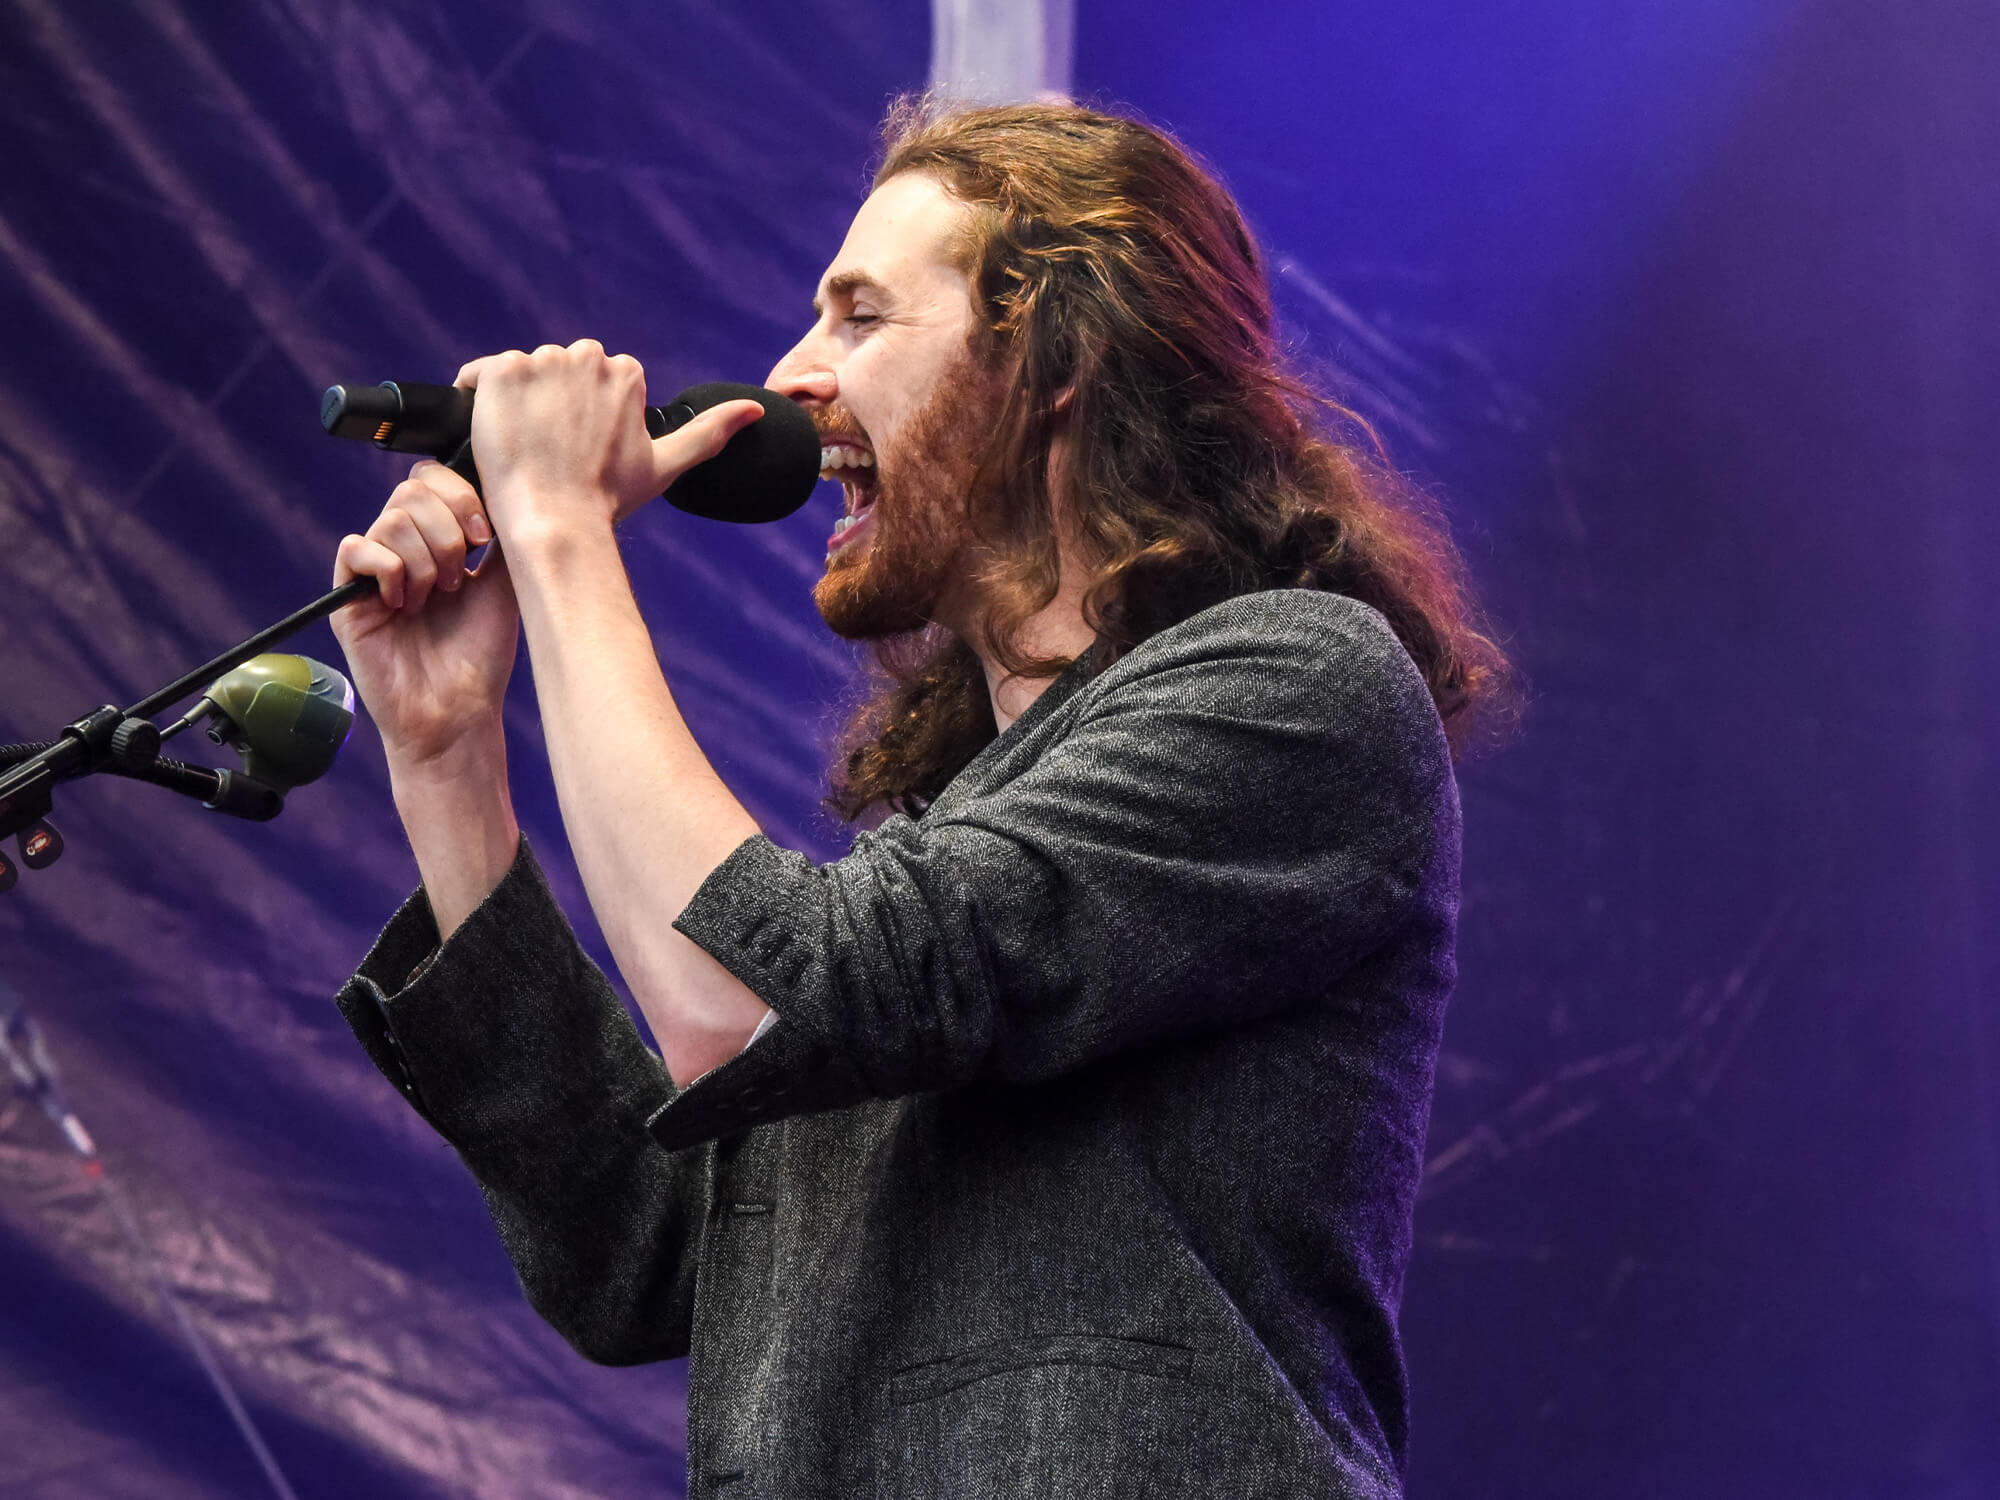 Hozier on stage, he is gripping on to a microphone on a stand and singing